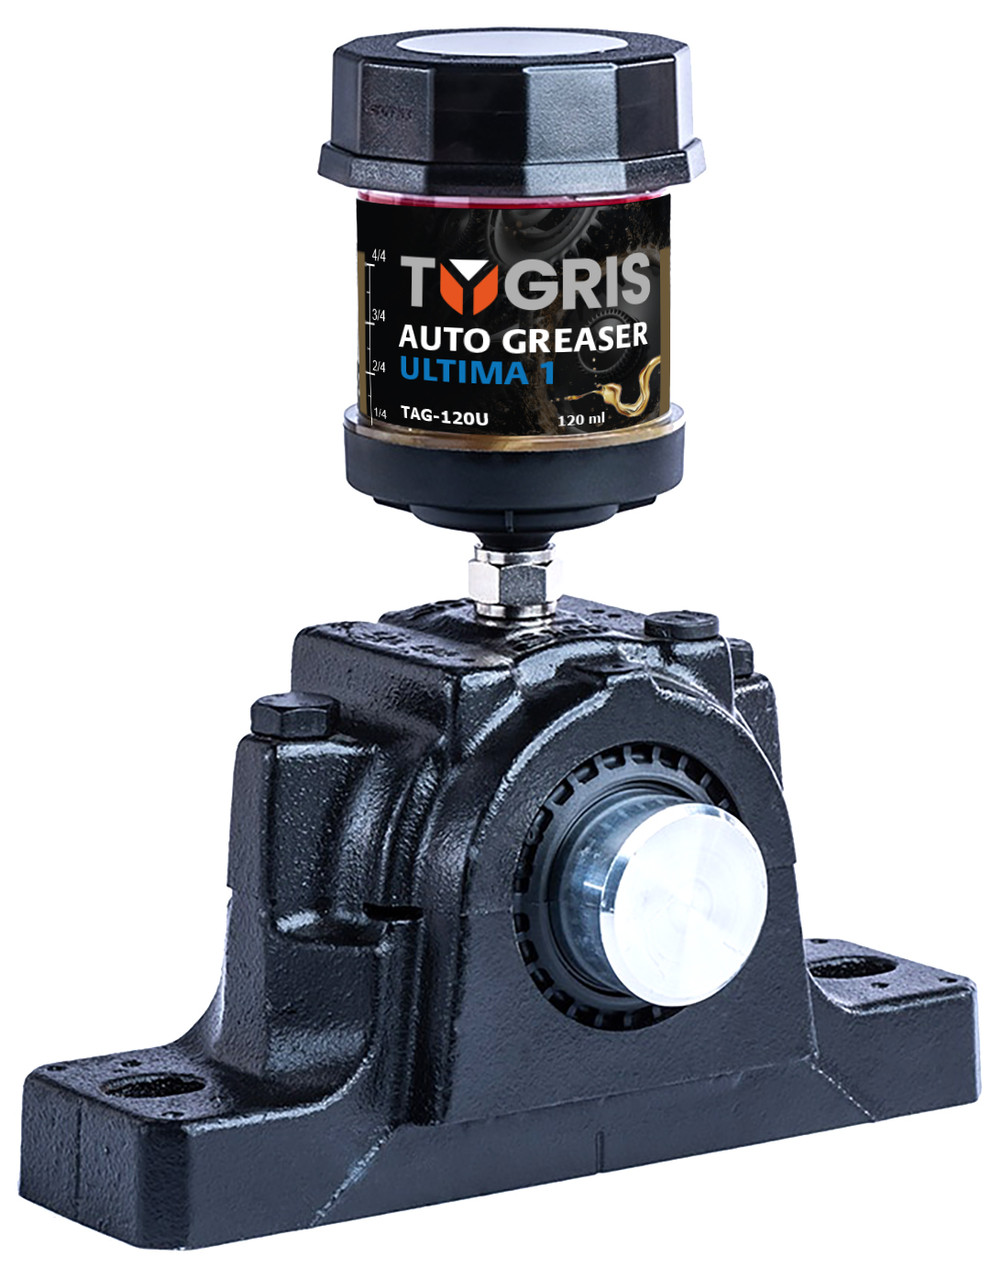 TYGRIS Auto Greaser - Ultima 1 120ml